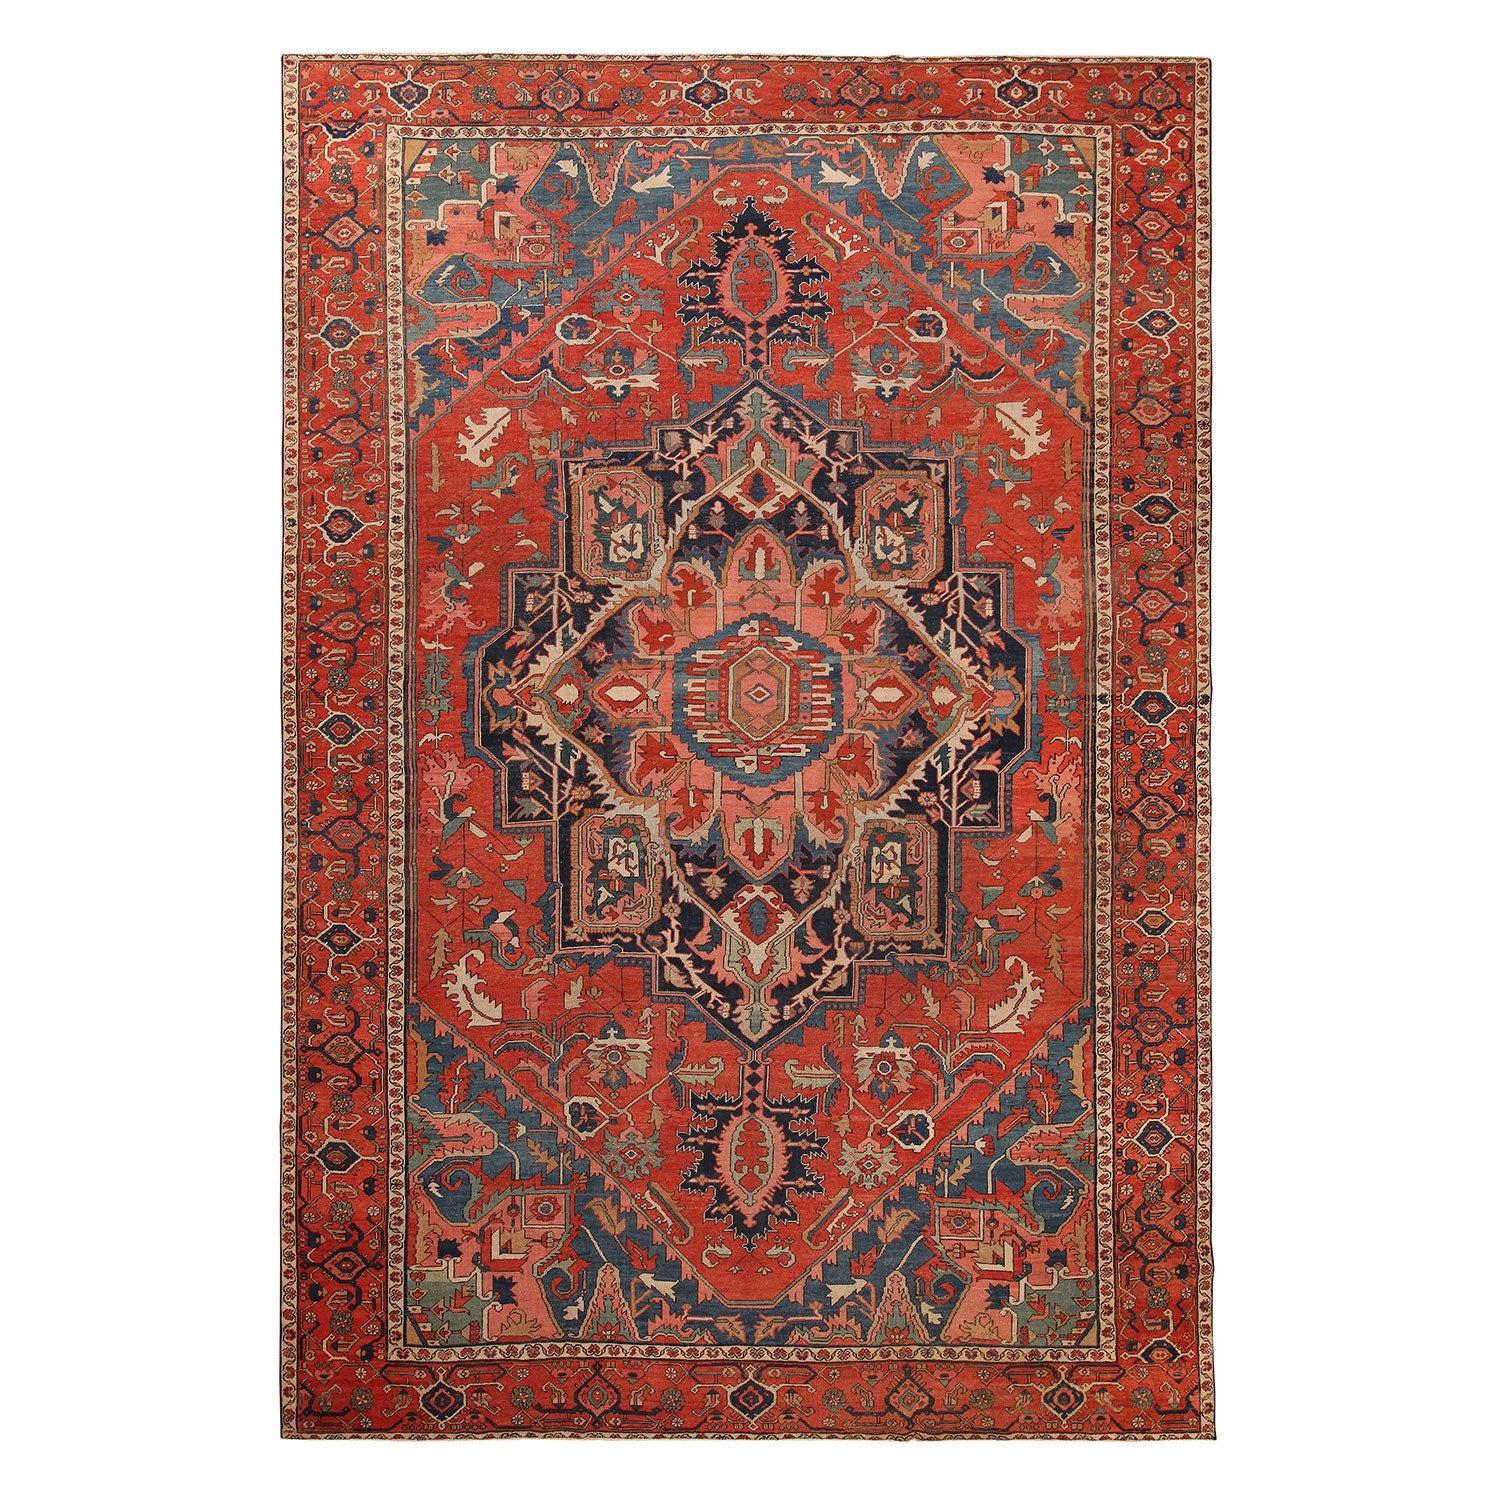 An antique hand-knotted oriental rug with intricate patterns and vibrant colors.